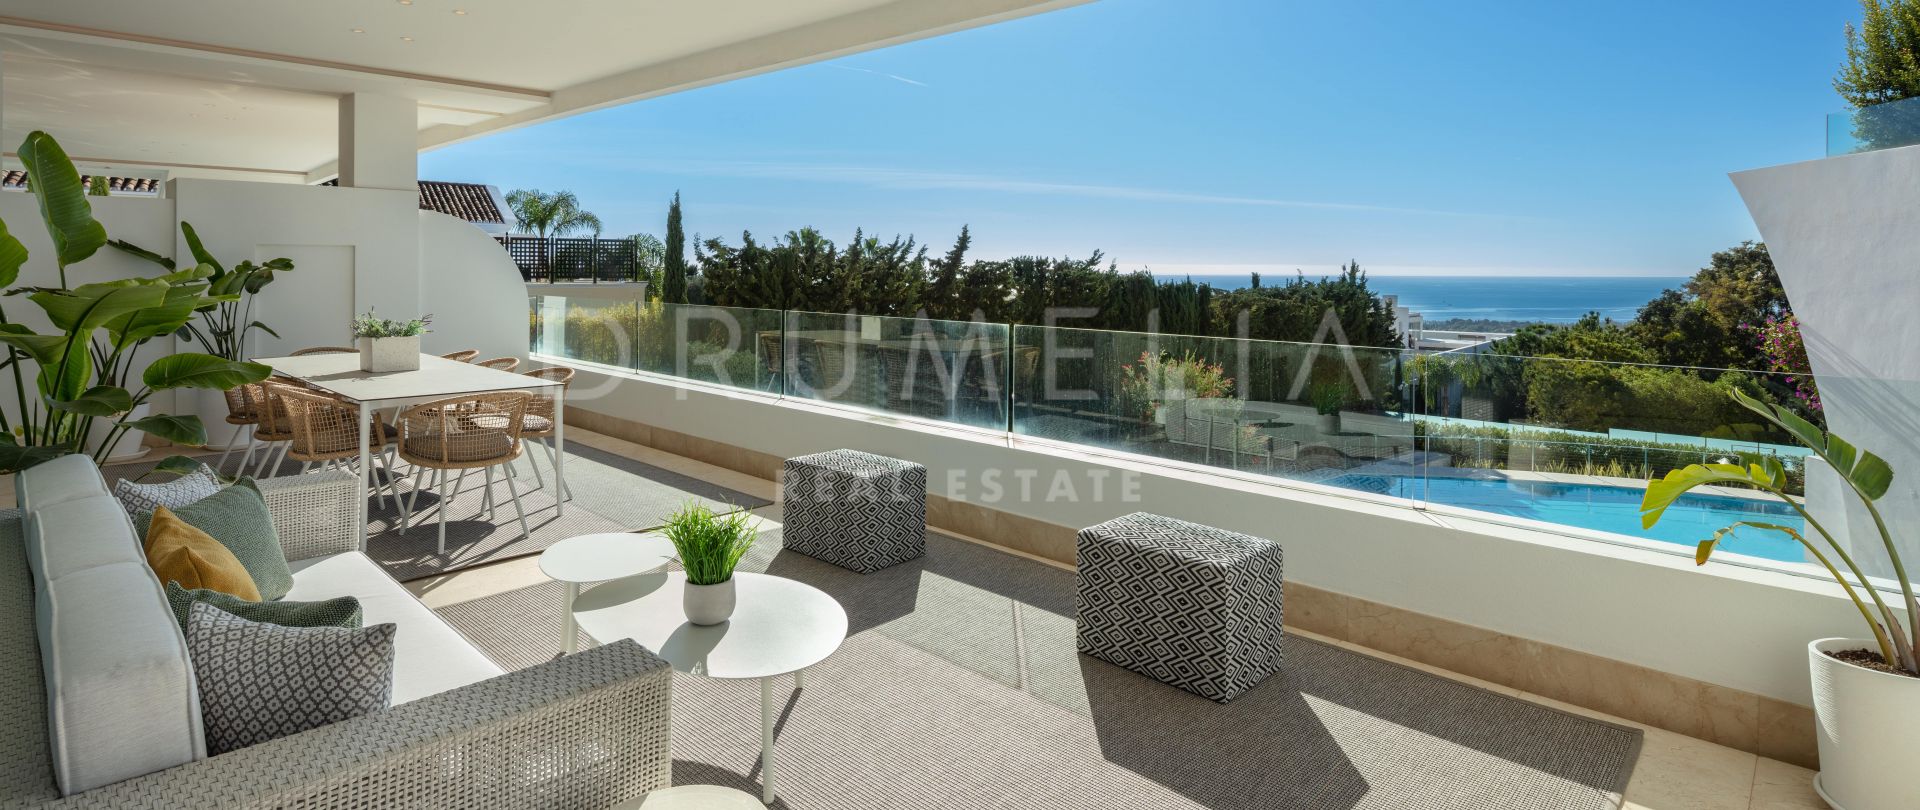 Reserva 10 - Elegant high-end duplex penthouse with sea views for sale in Sierra Blanca, Marbella's Golden Mile